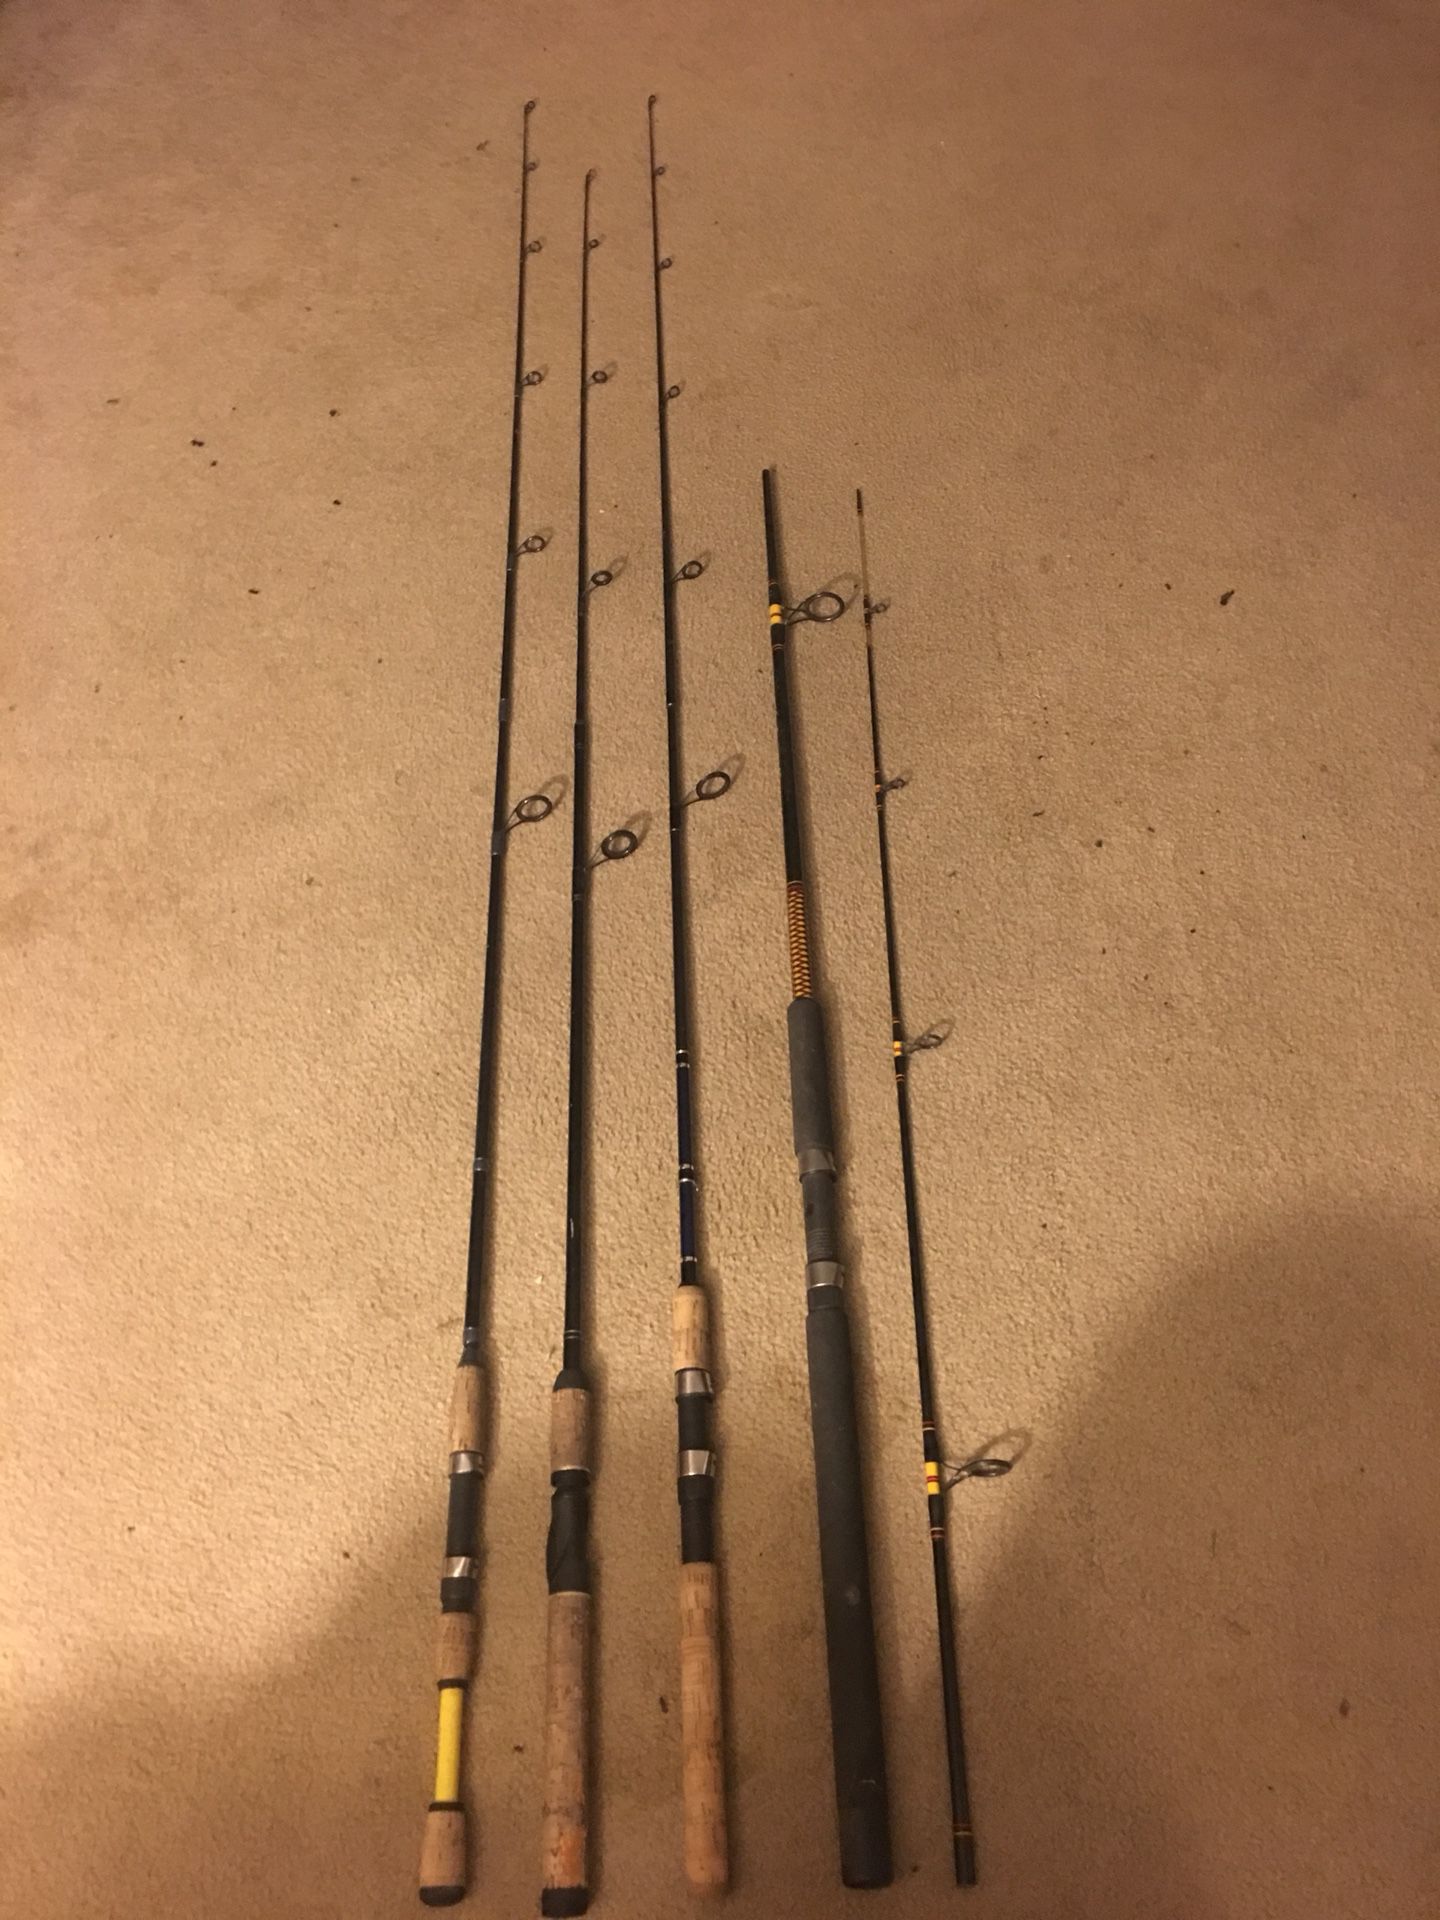 9ft Salmon Steelhead Ugly Stick Carbon Fishing Rod And Reel Combo for Sale  in Vancouver, WA - OfferUp